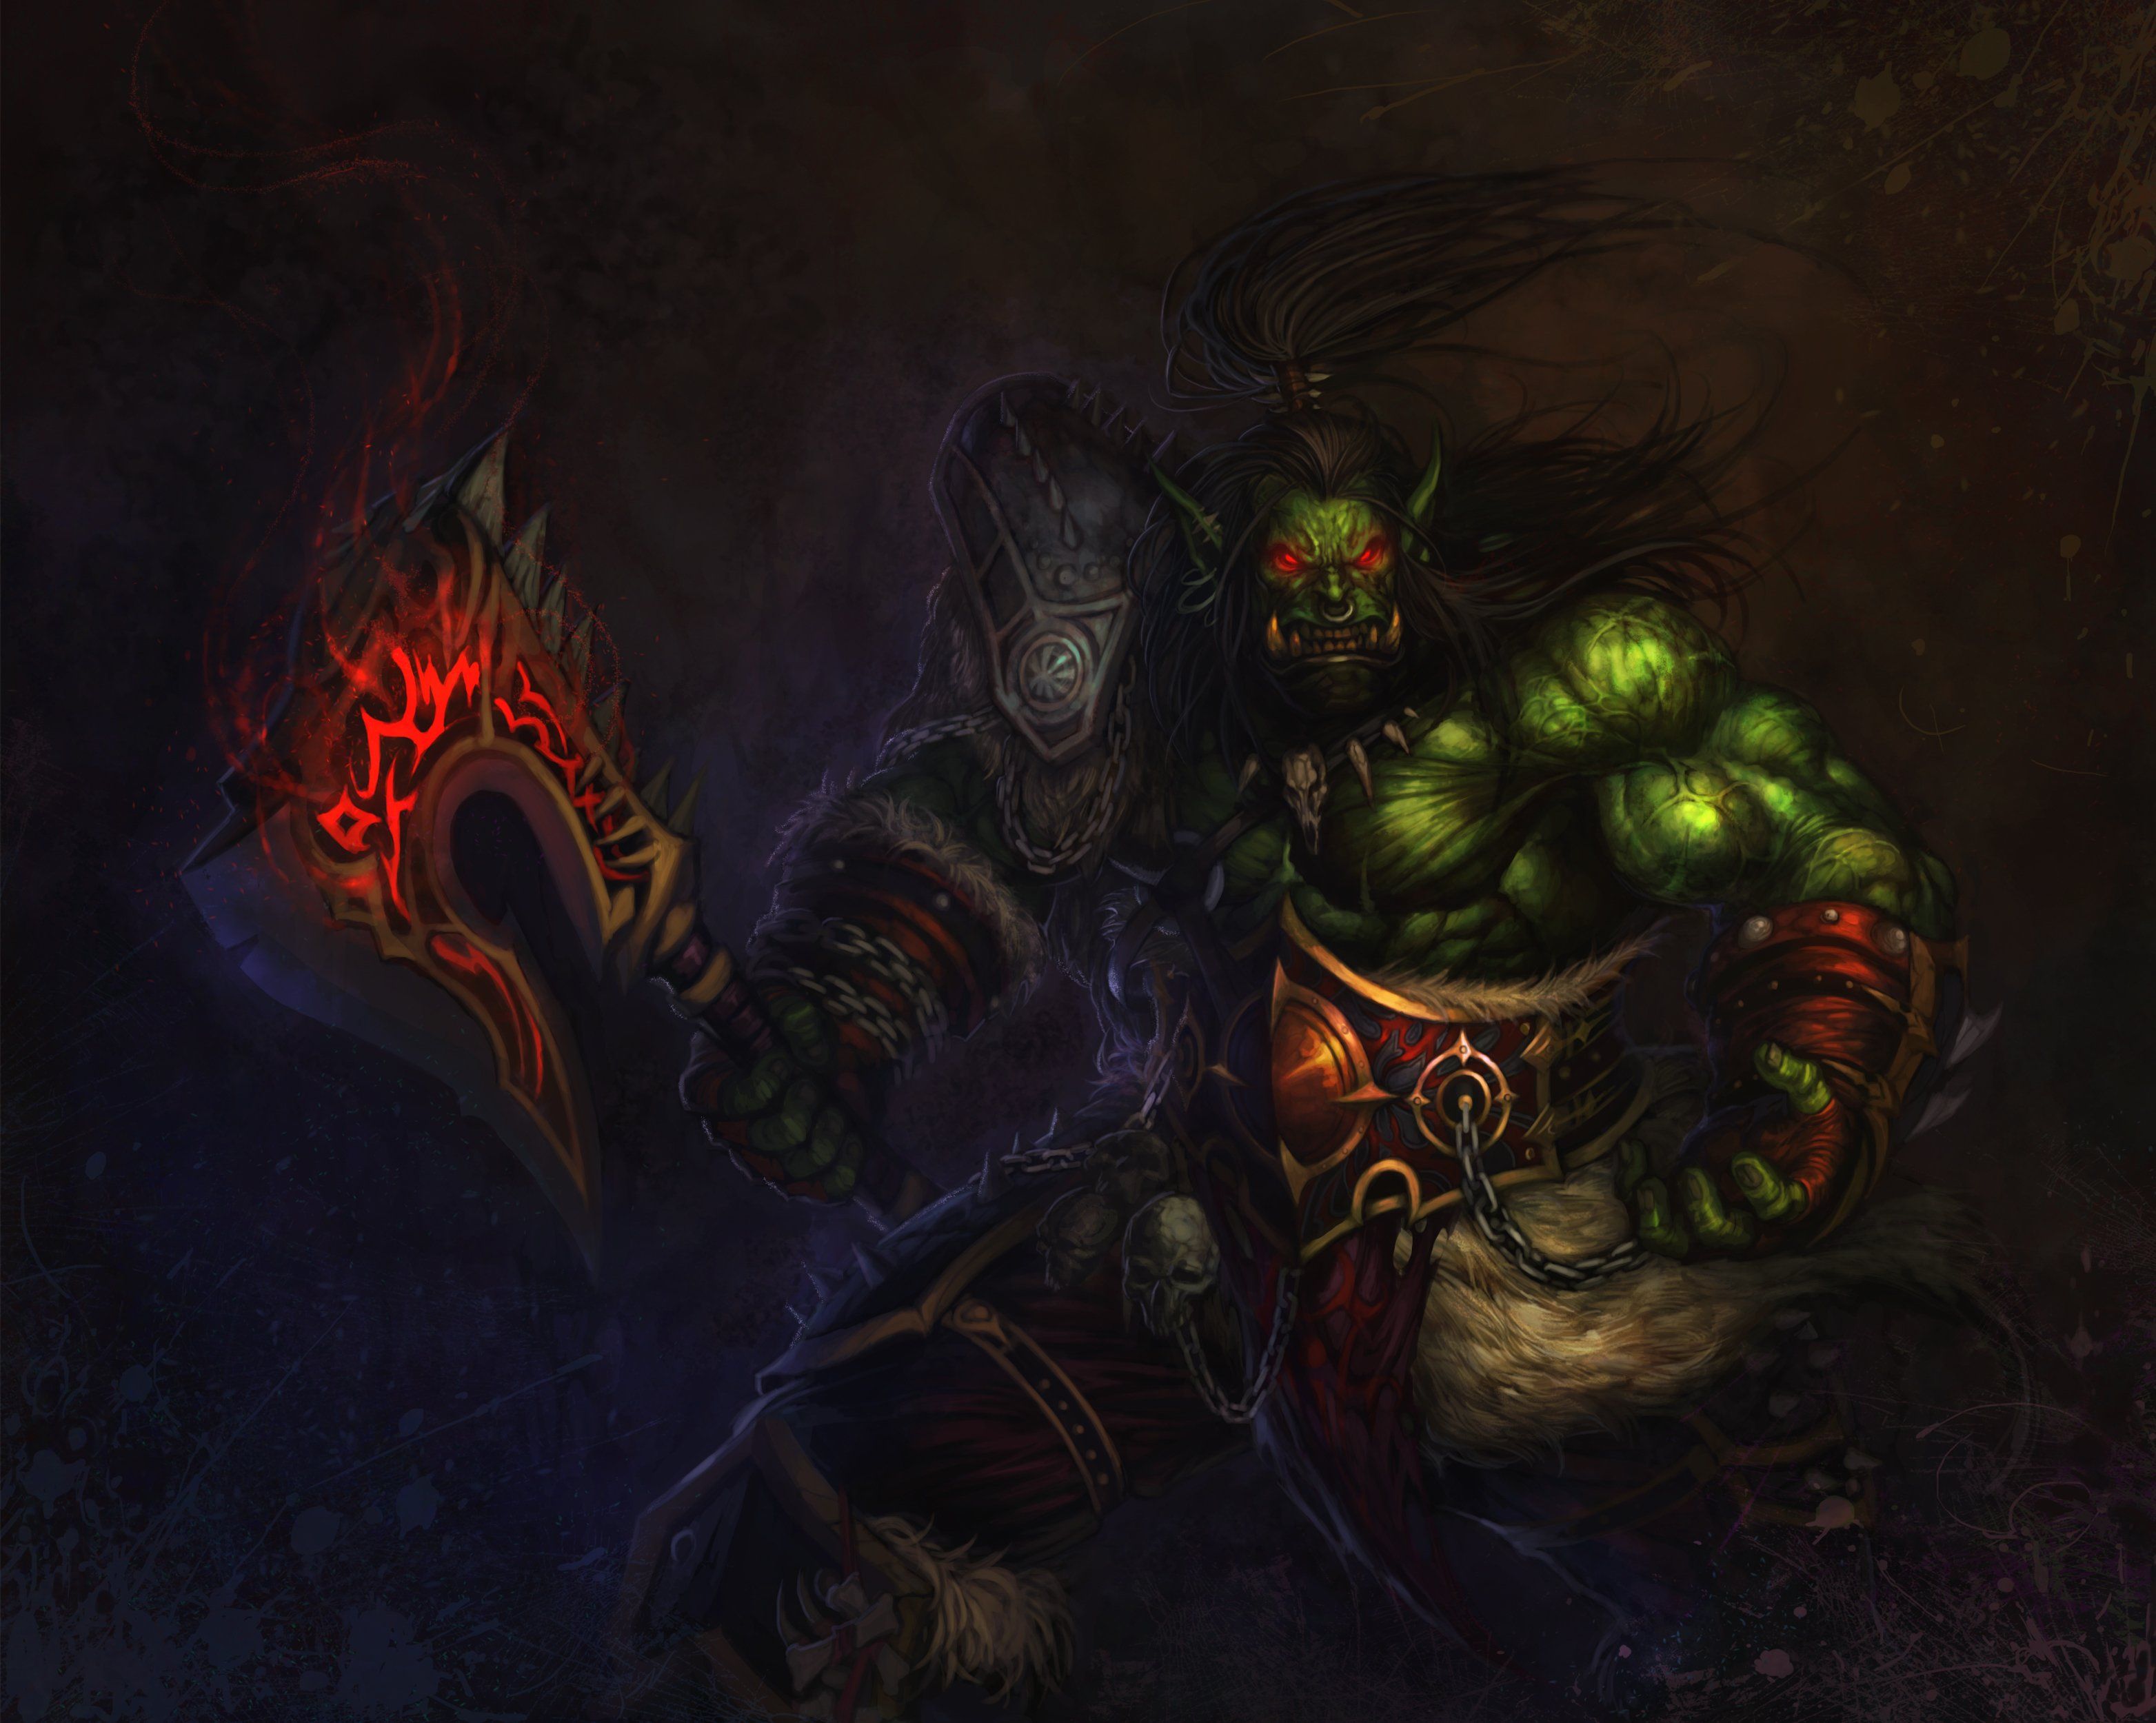 Free download World of WarCraft WoW Orc Warrior Games Fantasy wallpaper 3127x2499 [3127x2499] for your Desktop, Mobile & Tablet. Explore WOW Warrior Wallpaper. WOW Warrior Wallpaper, Wow Wallpaper, WoW Wallpaper